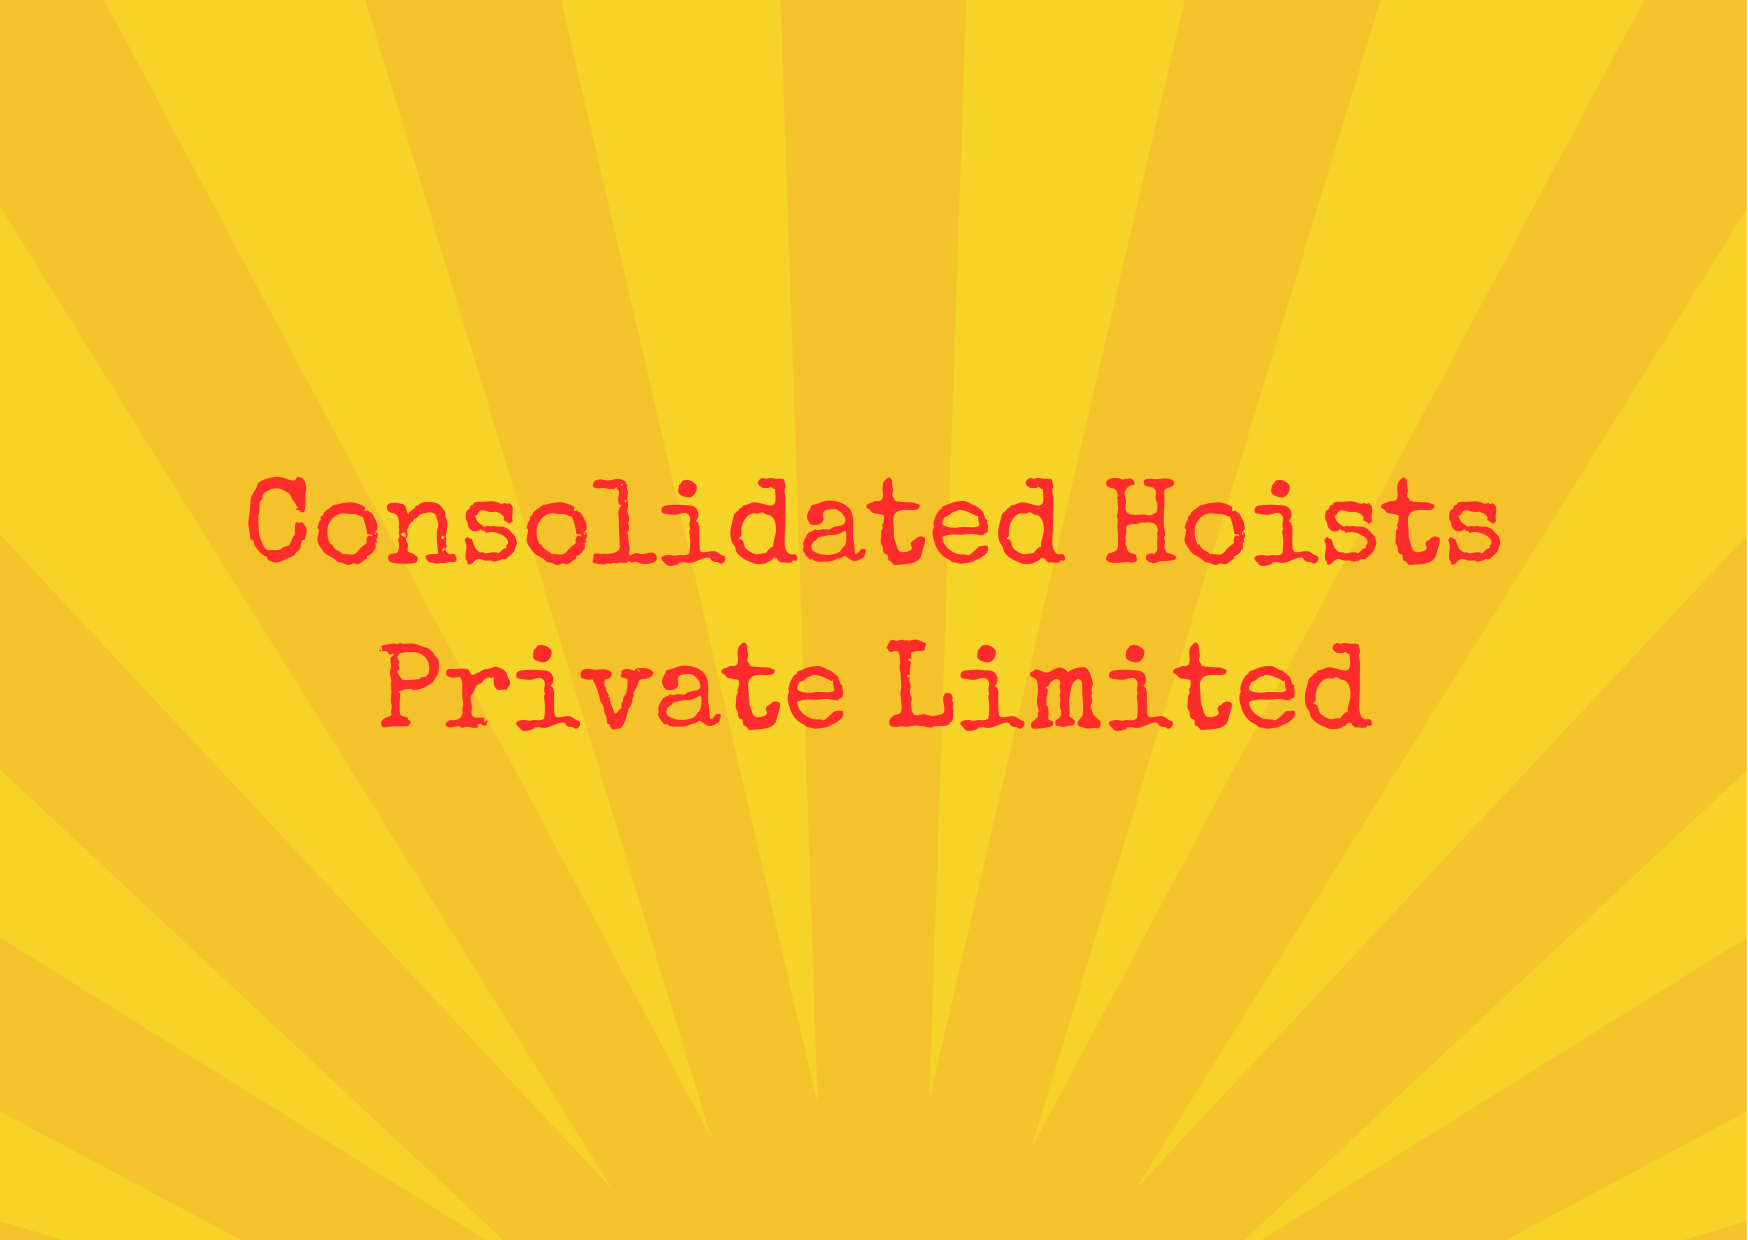  Consolidated Hoists Private Limited,   